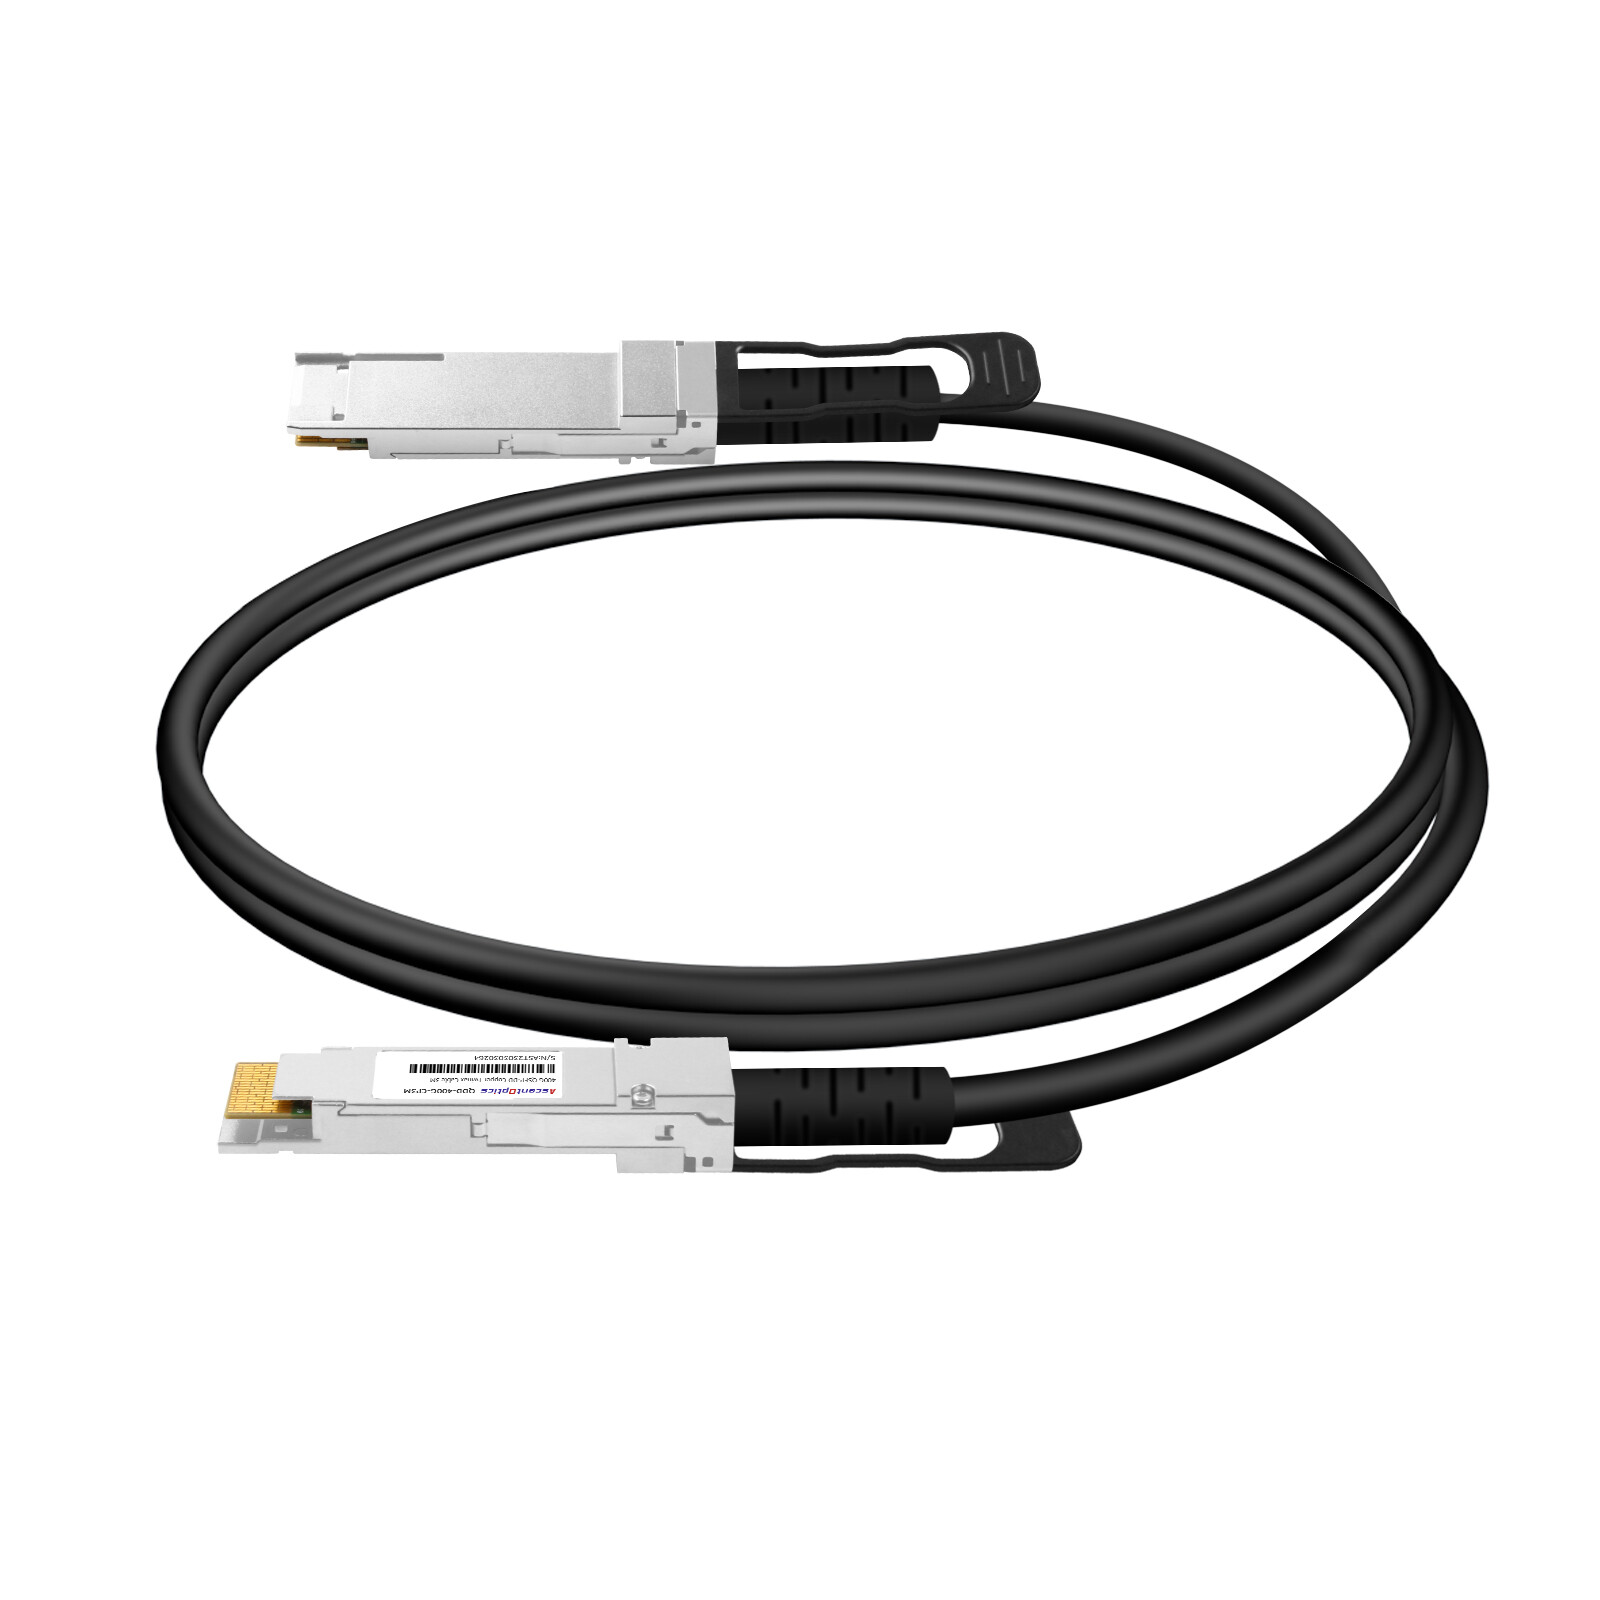 400G QSFP-DD Copper DAC Cable,3 Meters,Passive